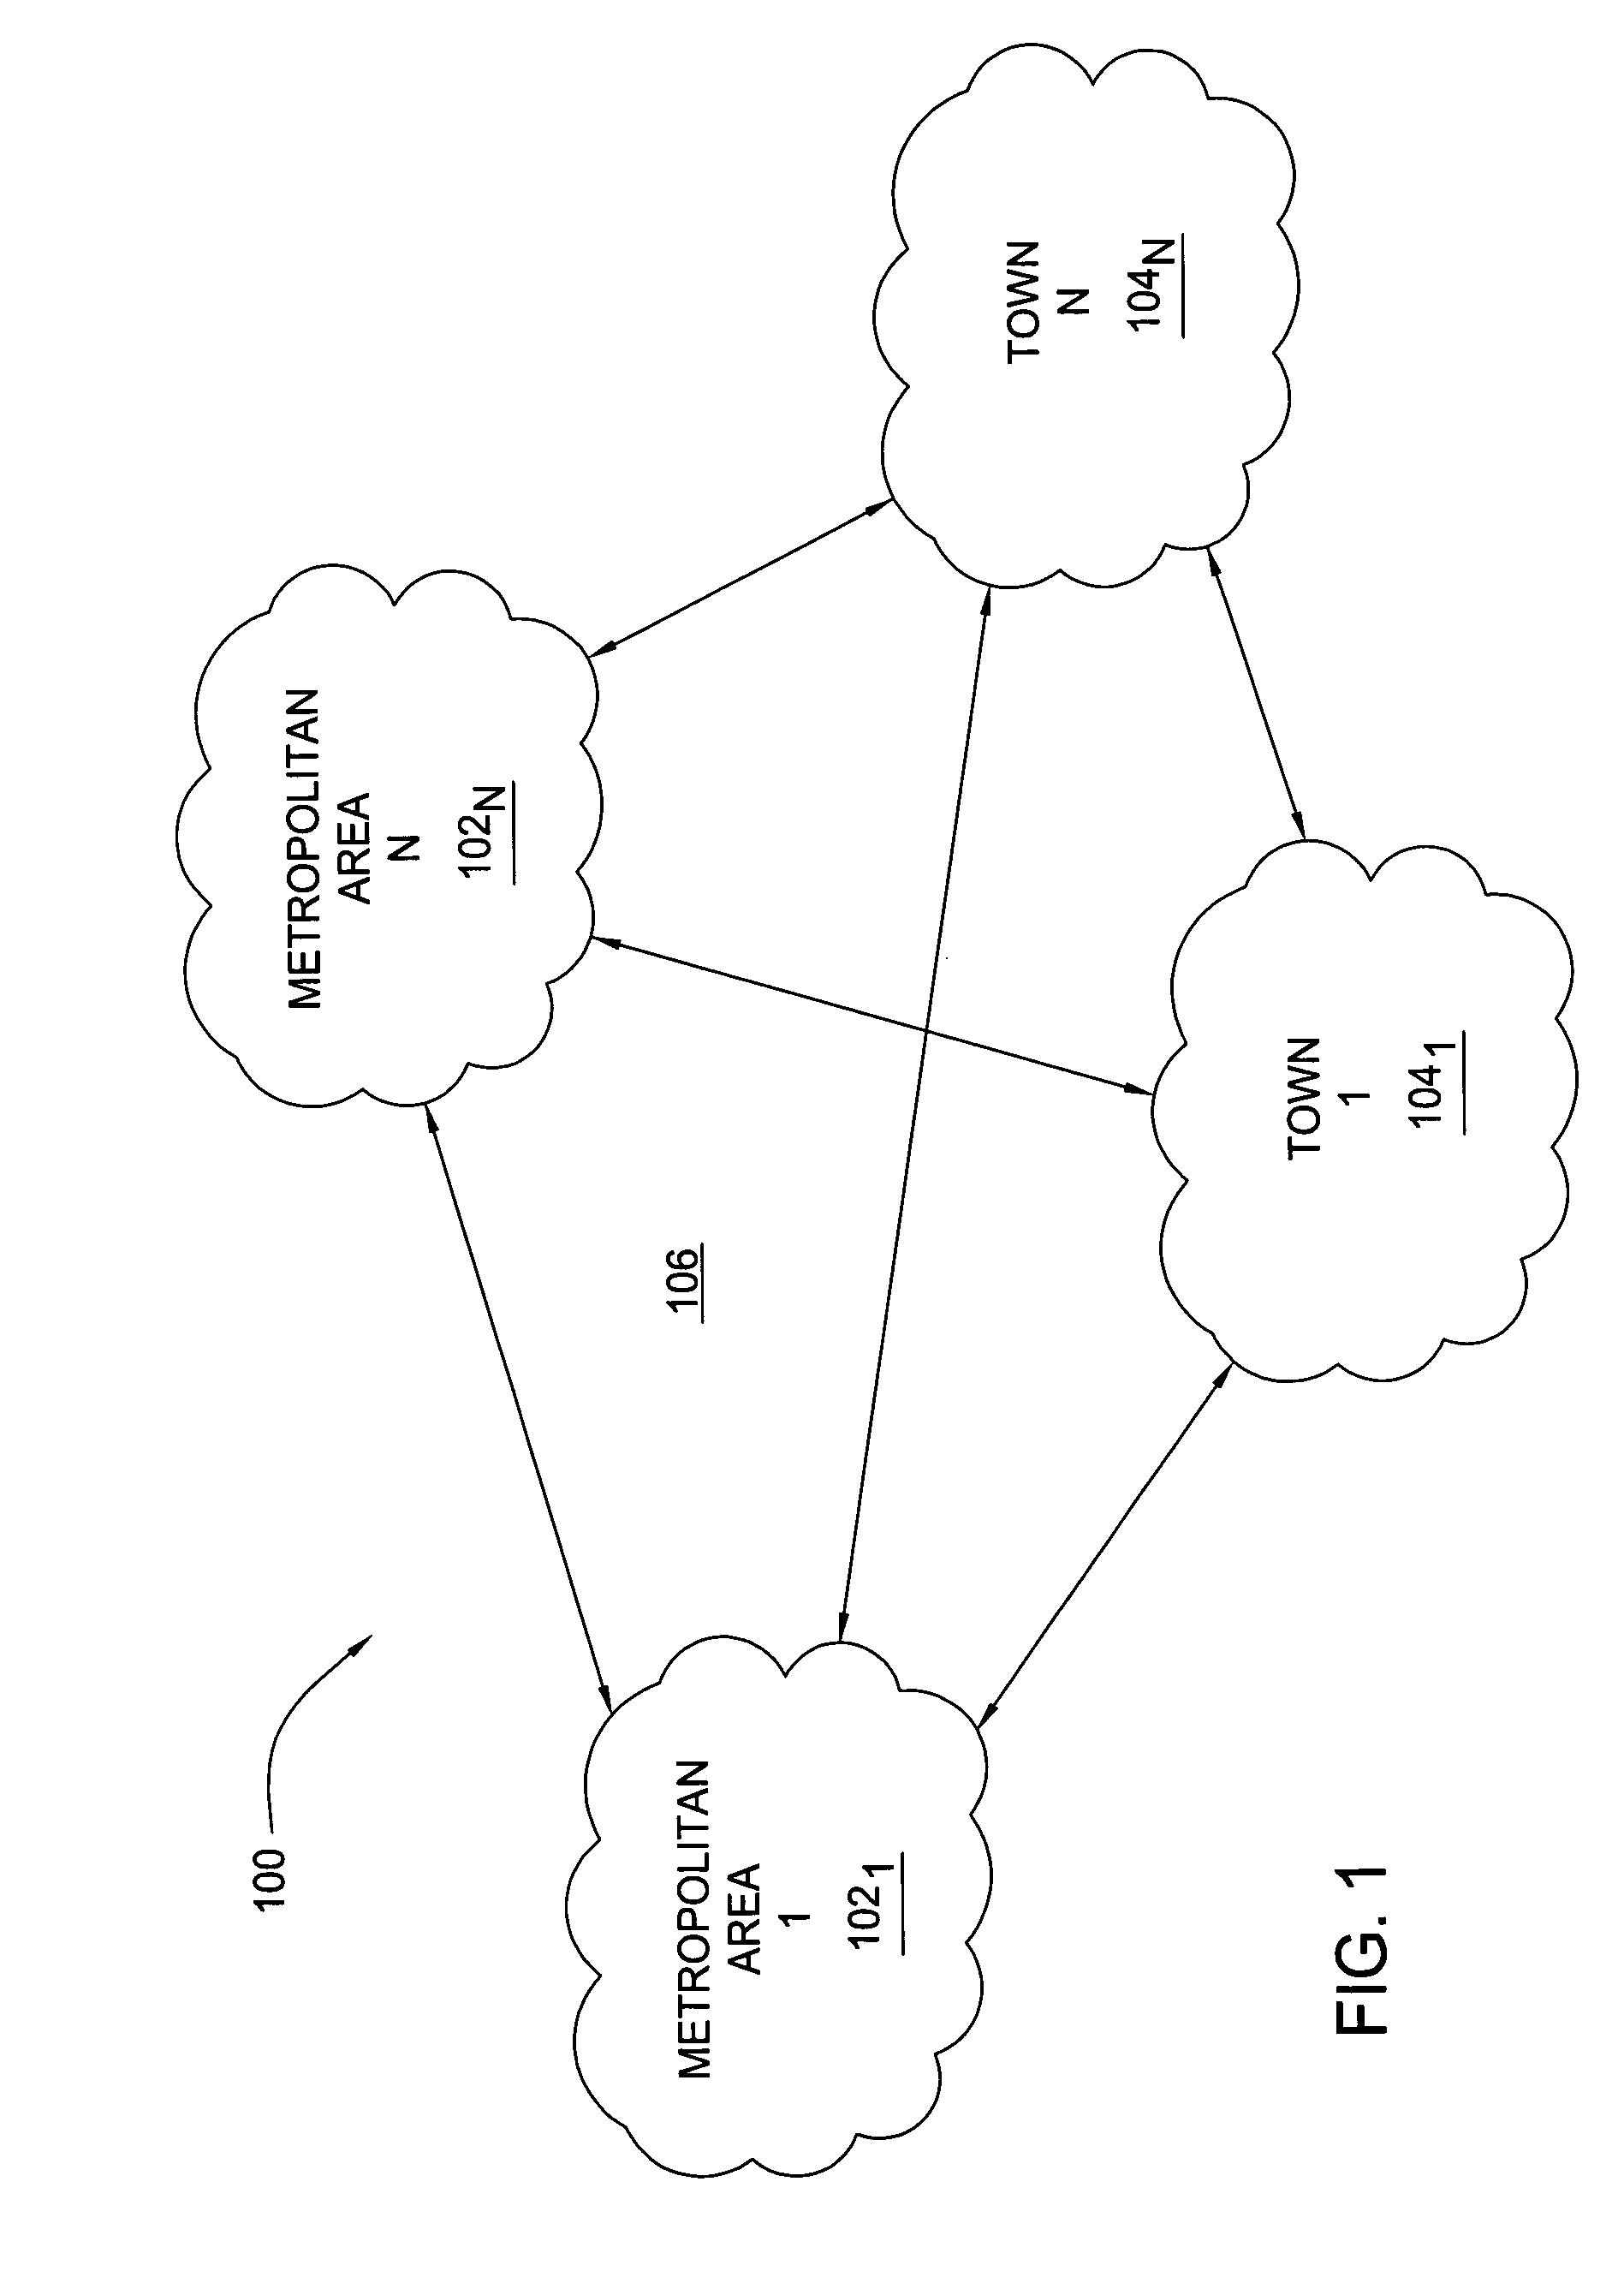 Method and apparatus for end-to-end travel time estimation using dynamic traffic data